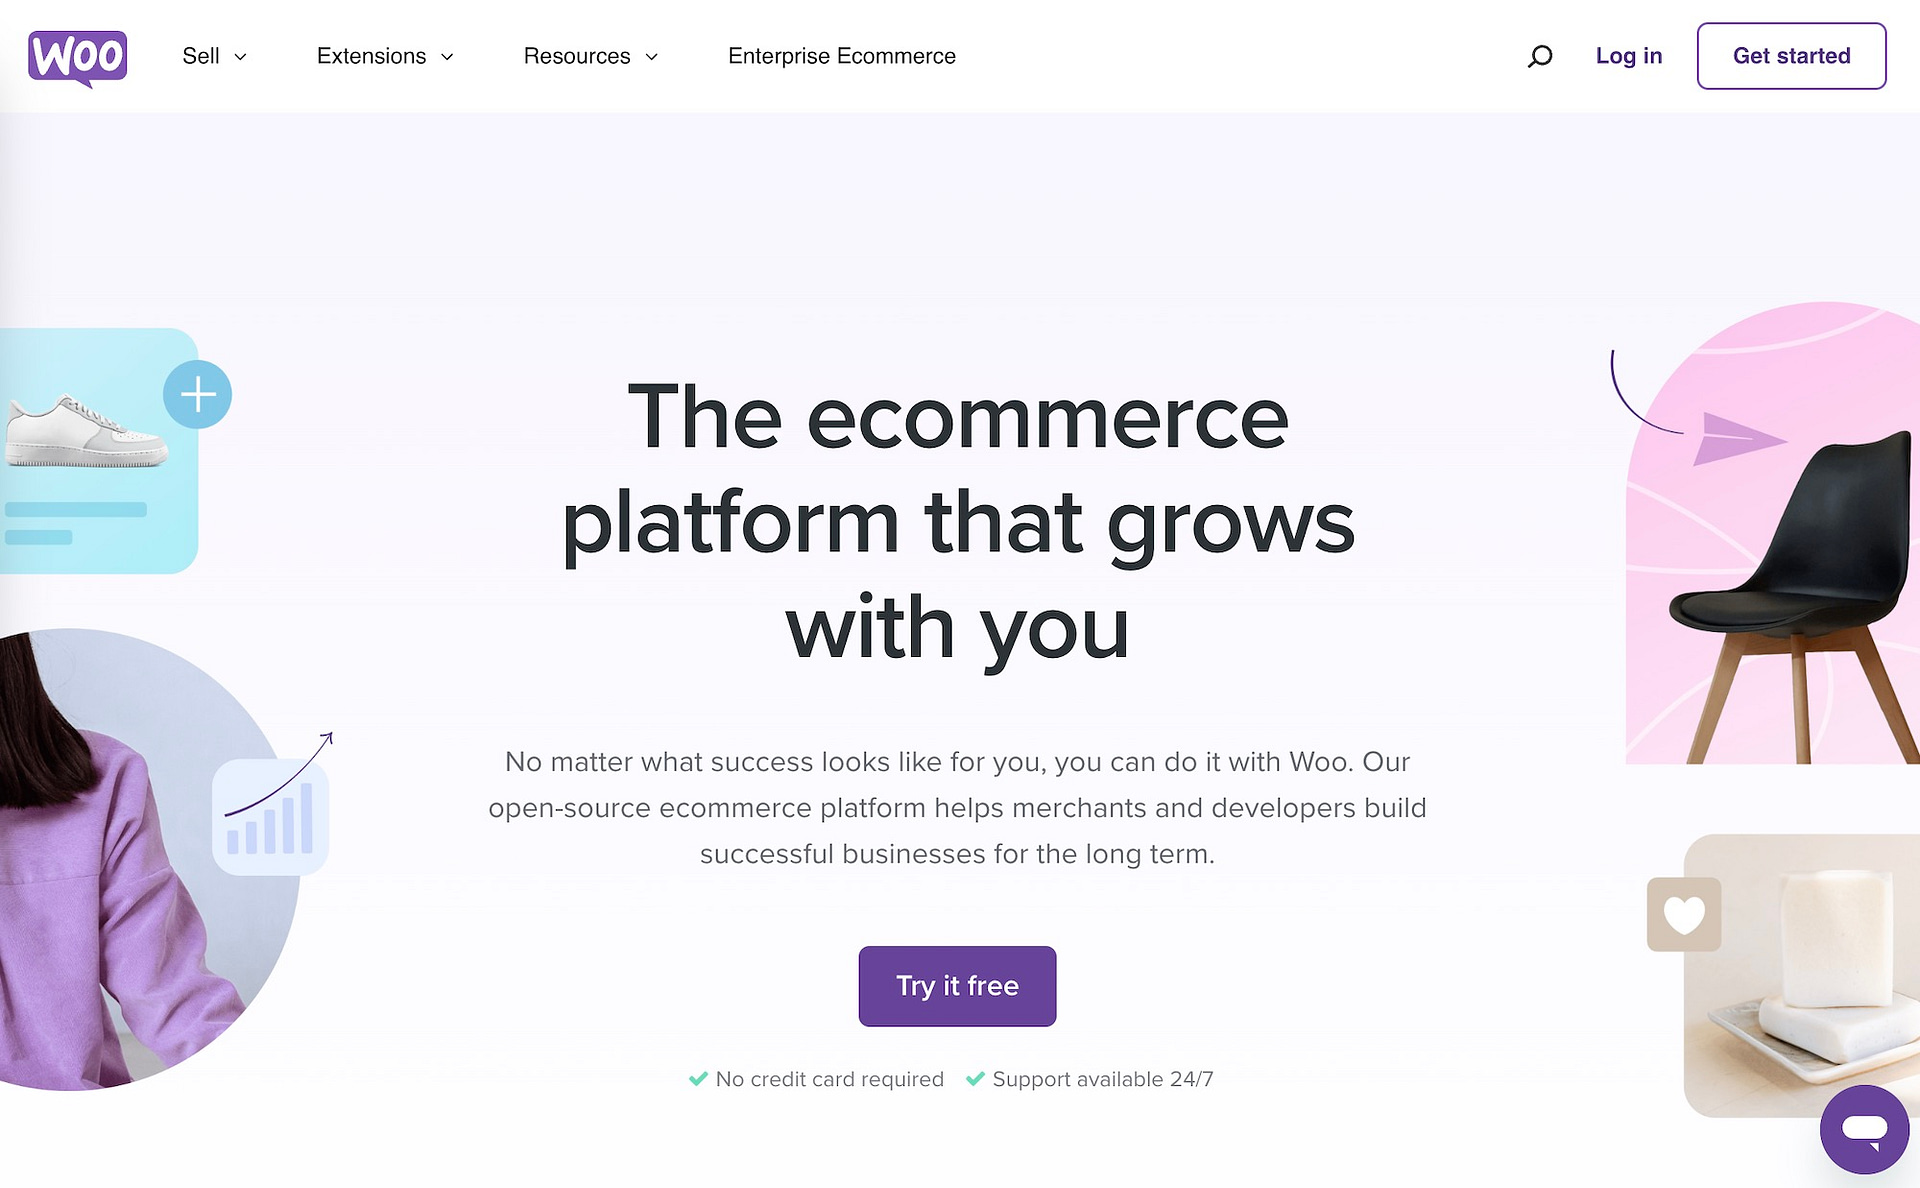 WooCommerce is one of the best  open source ecommerce platforms.